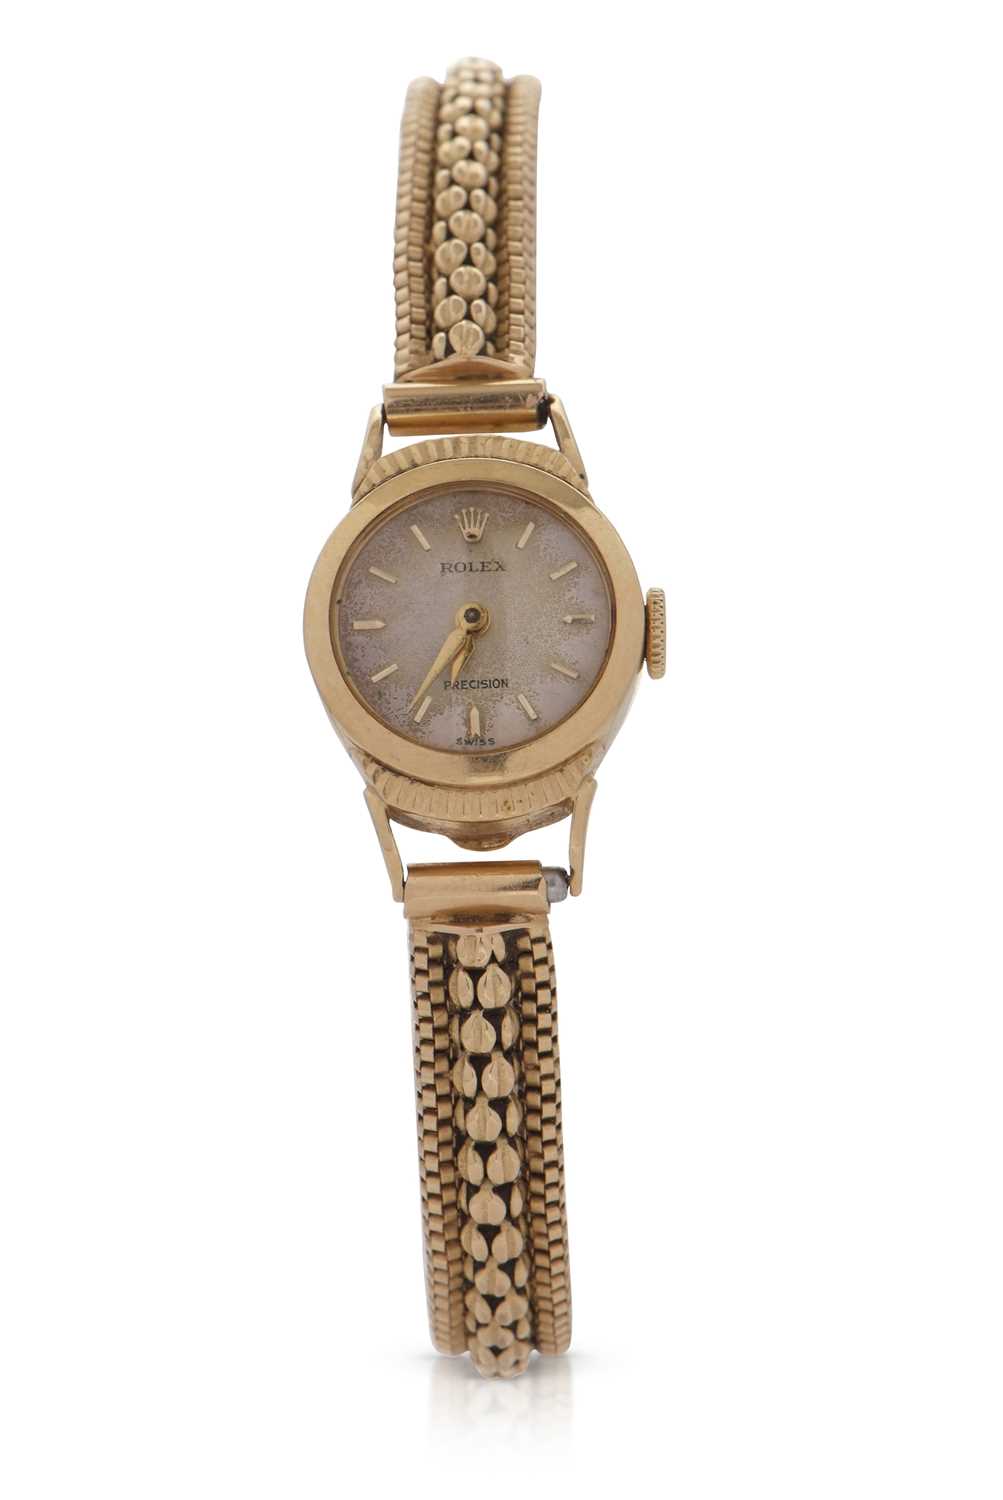 An 18ct gold ladies Rolex Precision with box and guarantee, stamped on the bracelet clasp and inside